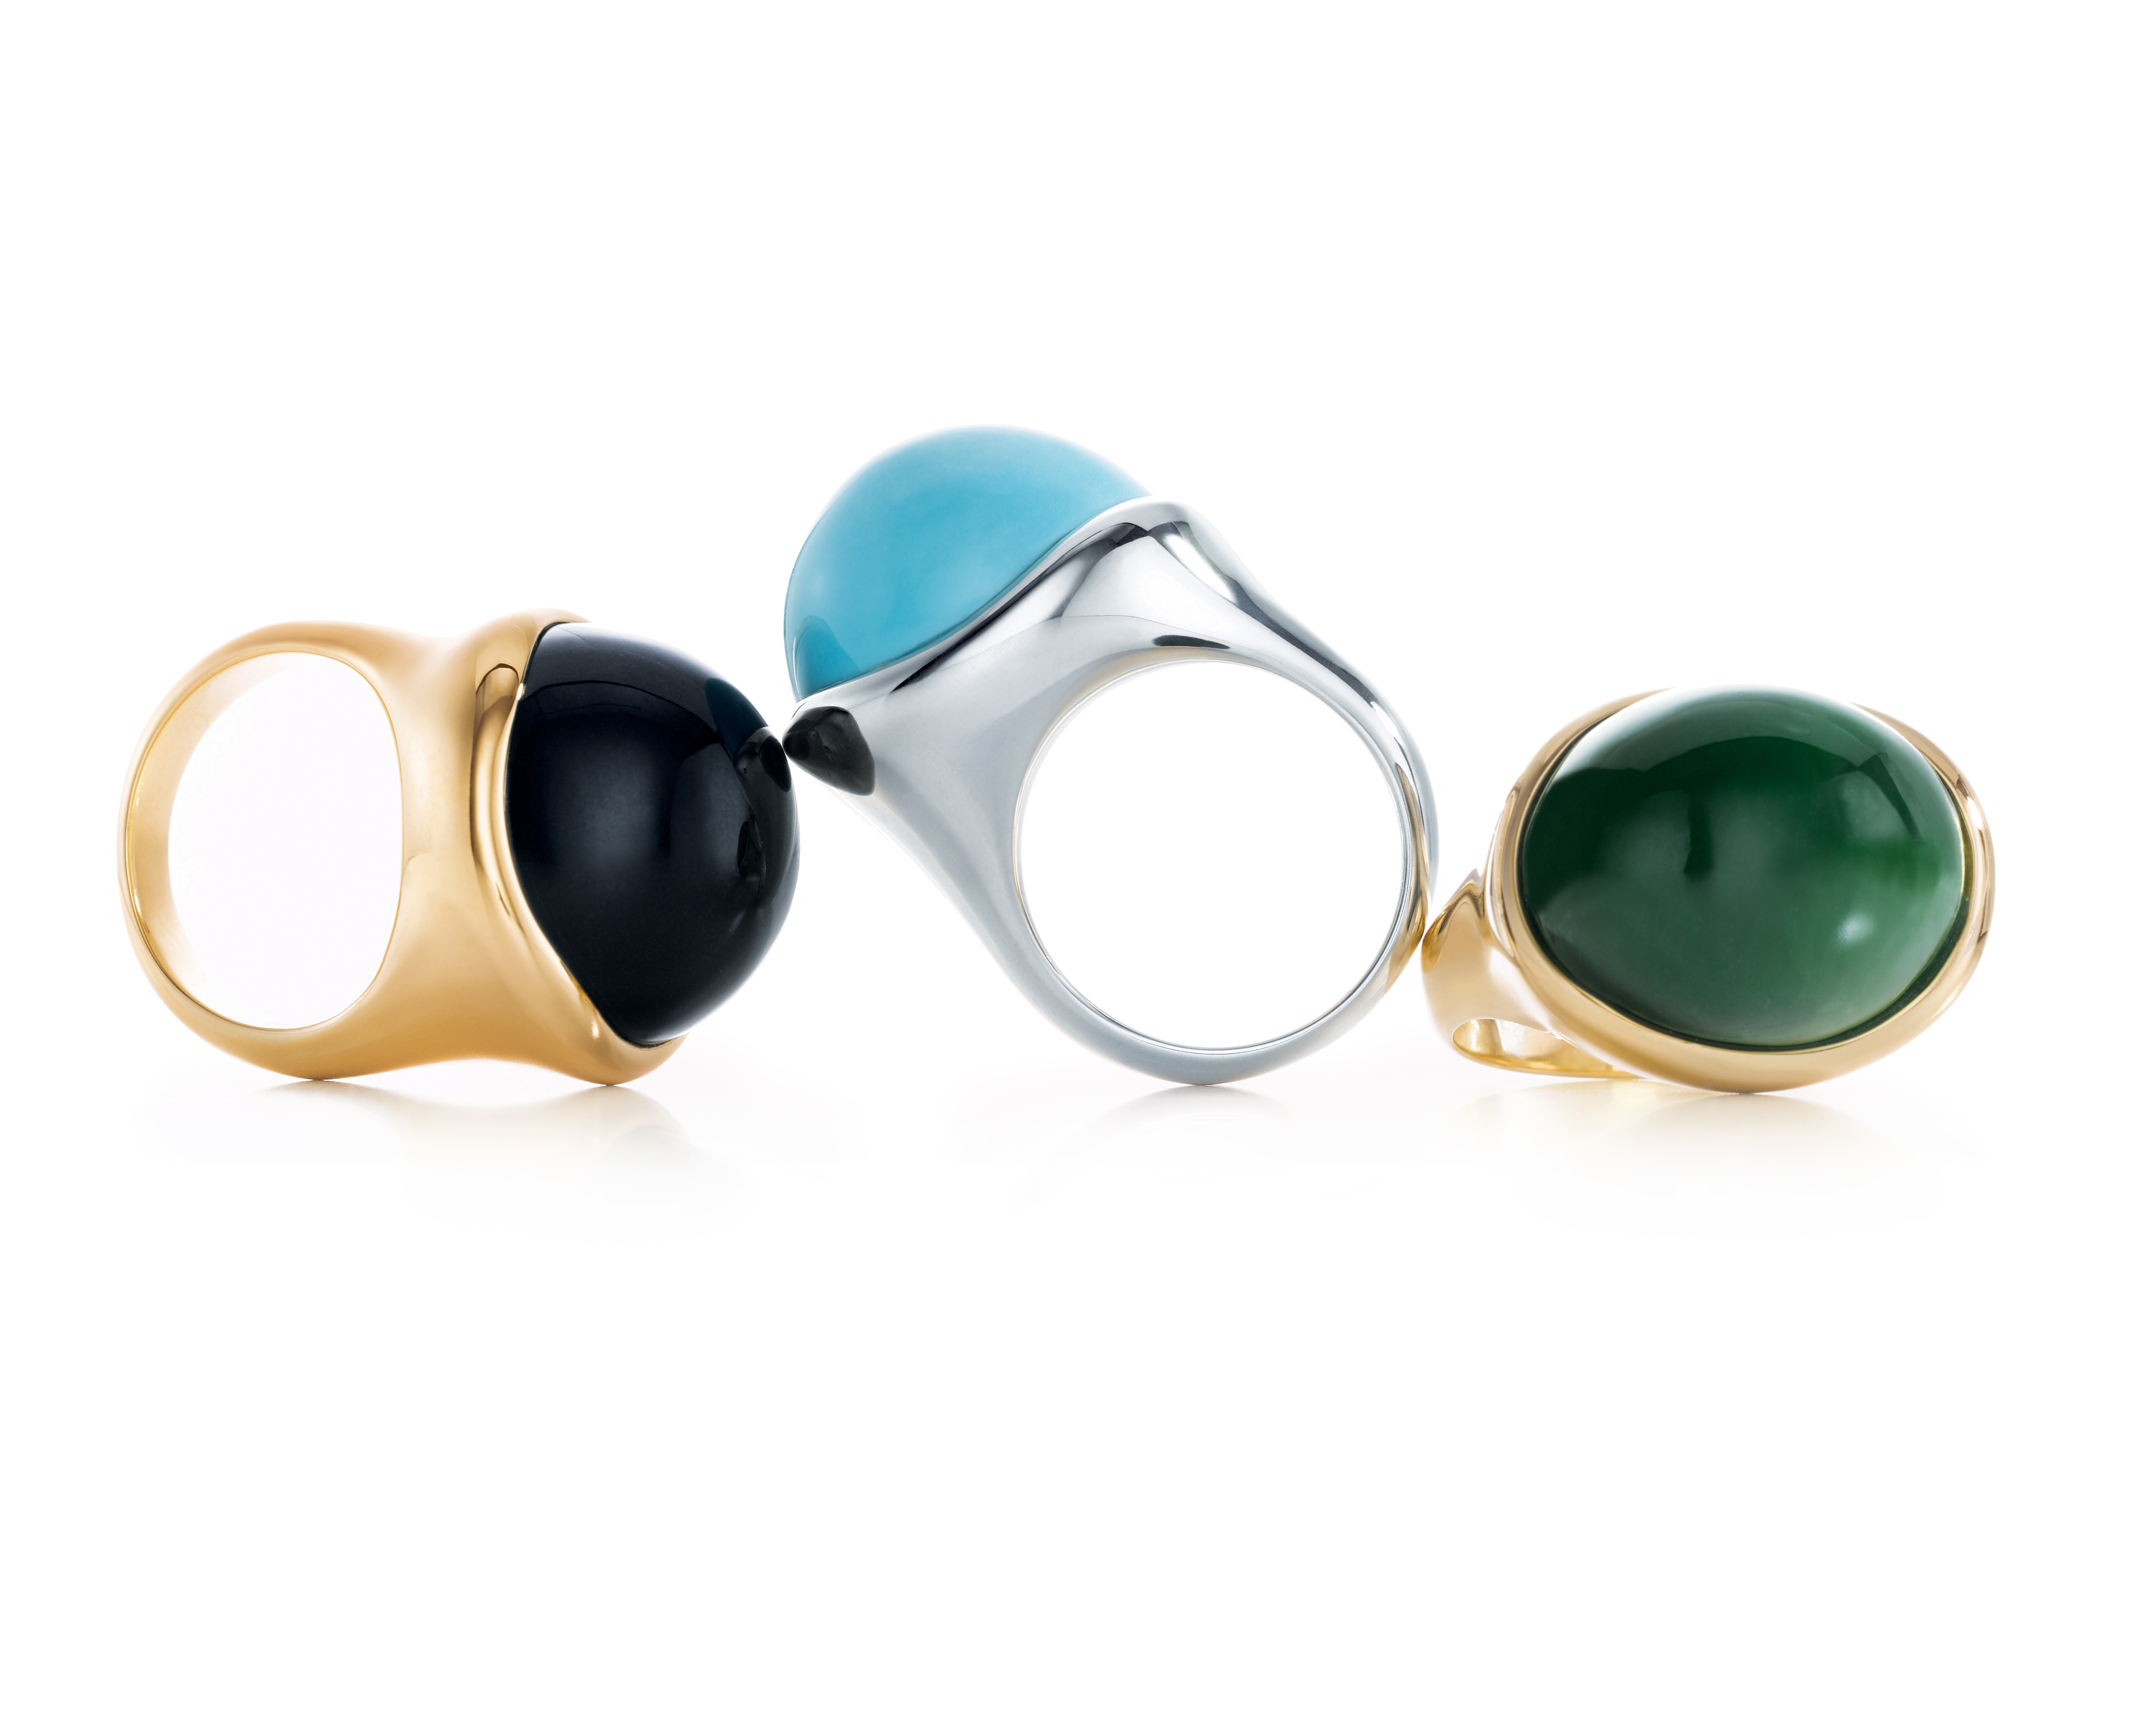 Love Elsa Peretti Cabochon Rings Searching for Style